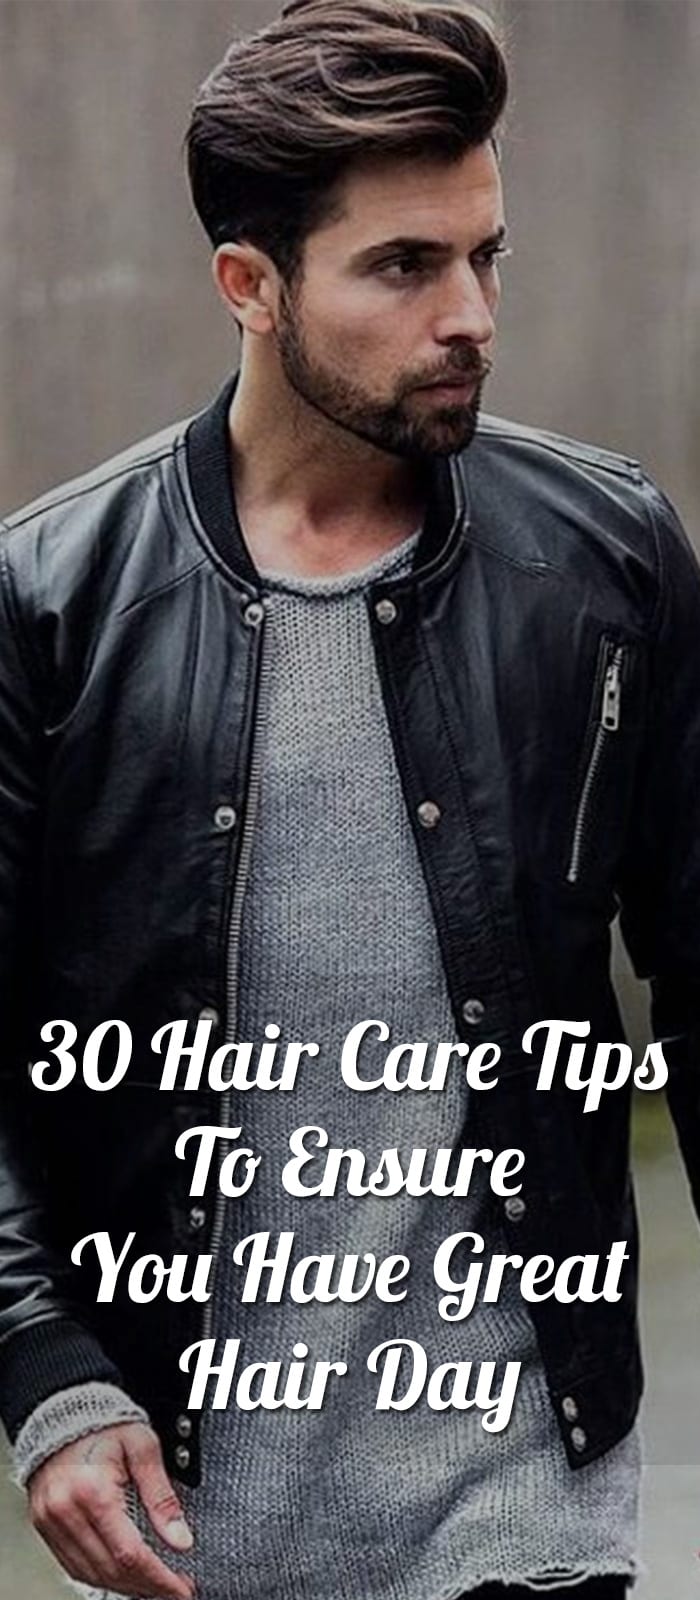 30-Hair-Care-Tips-To-Ensure-You-Have-Great-Hair-Day